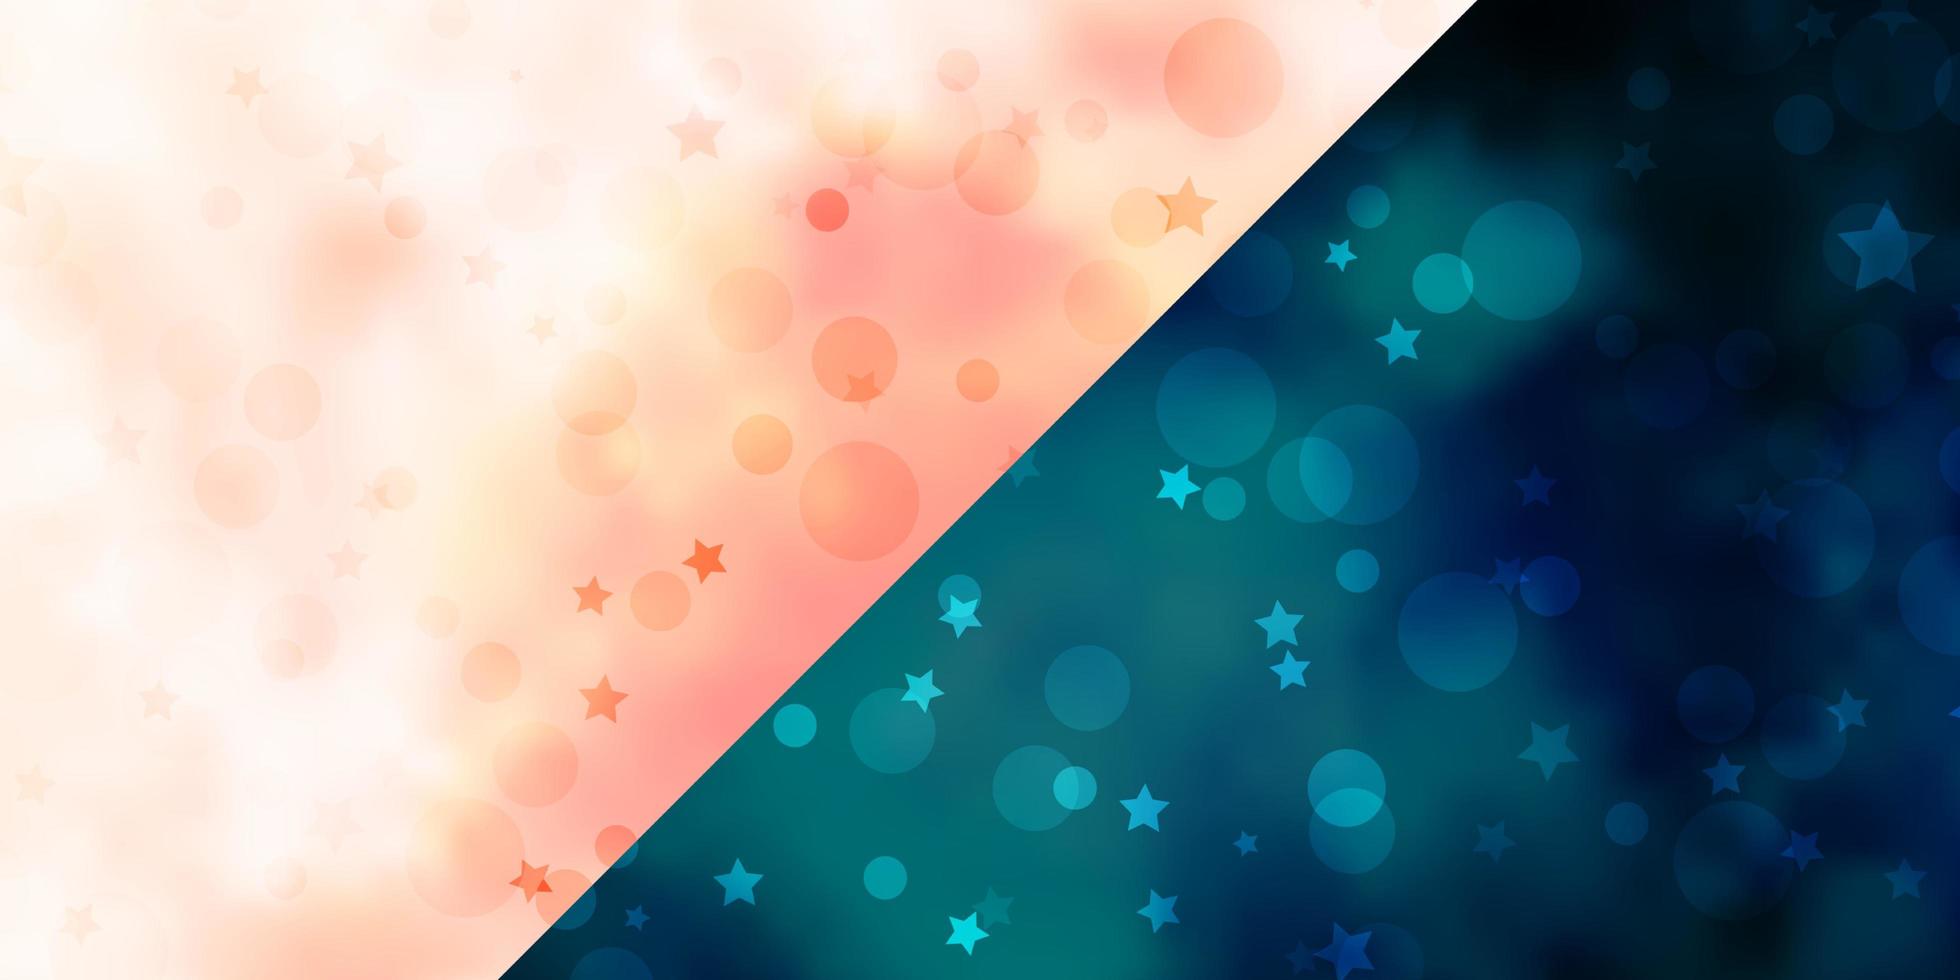 Vector texture with circles stars Abstract design in gradient style with bubbles stars Pattern for trendy fabric wallpapers